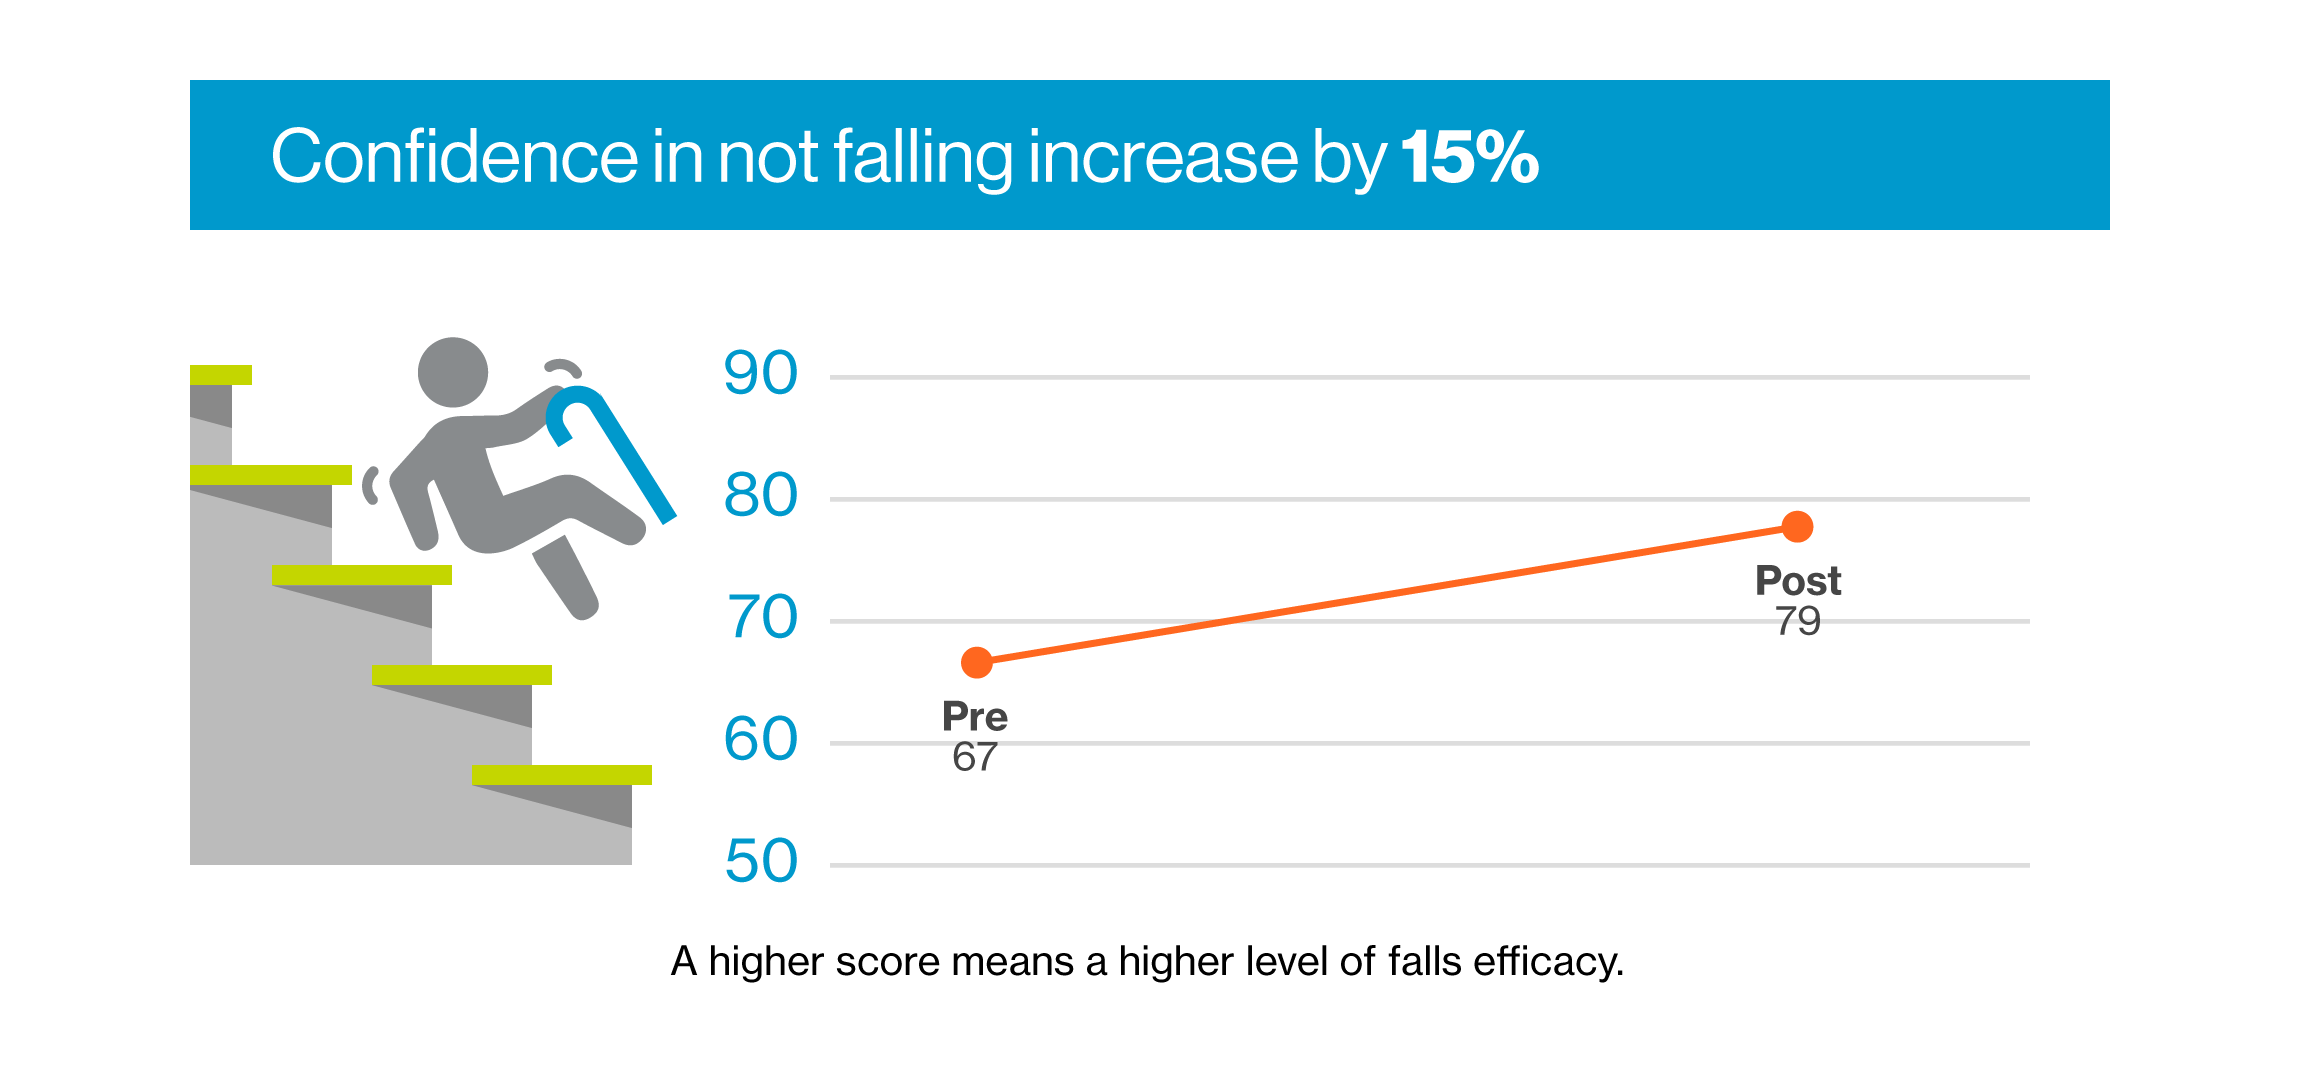 A graph with an icon of an older person on stairs. Copy: participants' confidence in not falling increased by 15%.